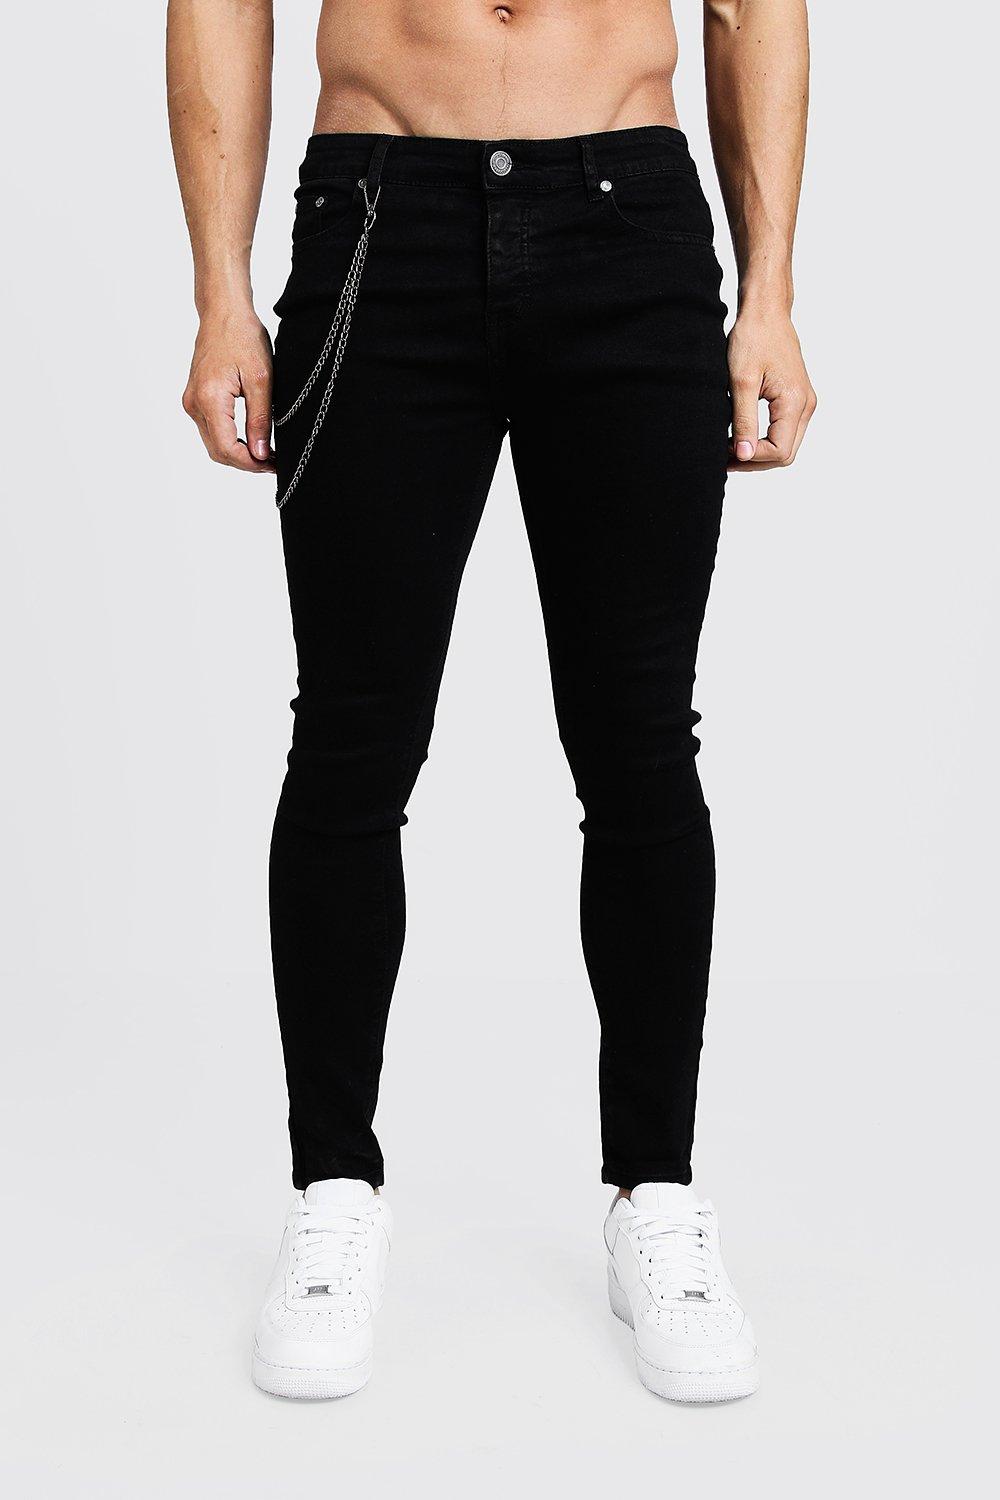 chain jeans mens